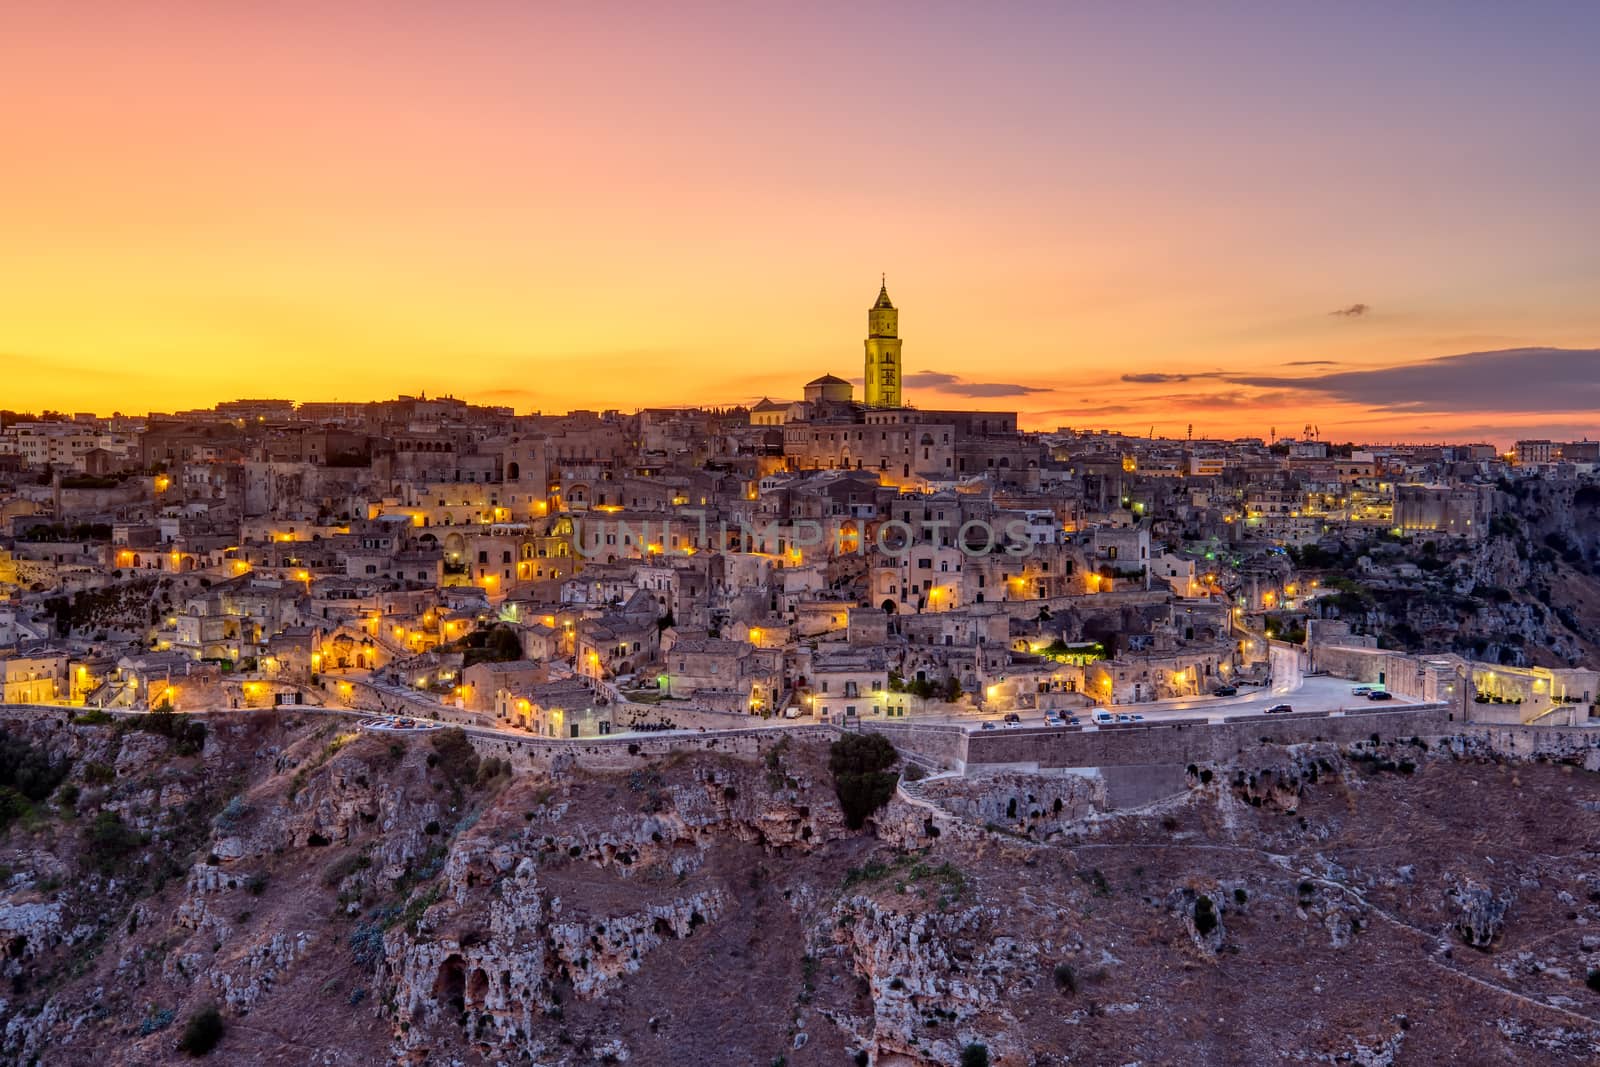 View of the beautiful old town of Matera by elxeneize